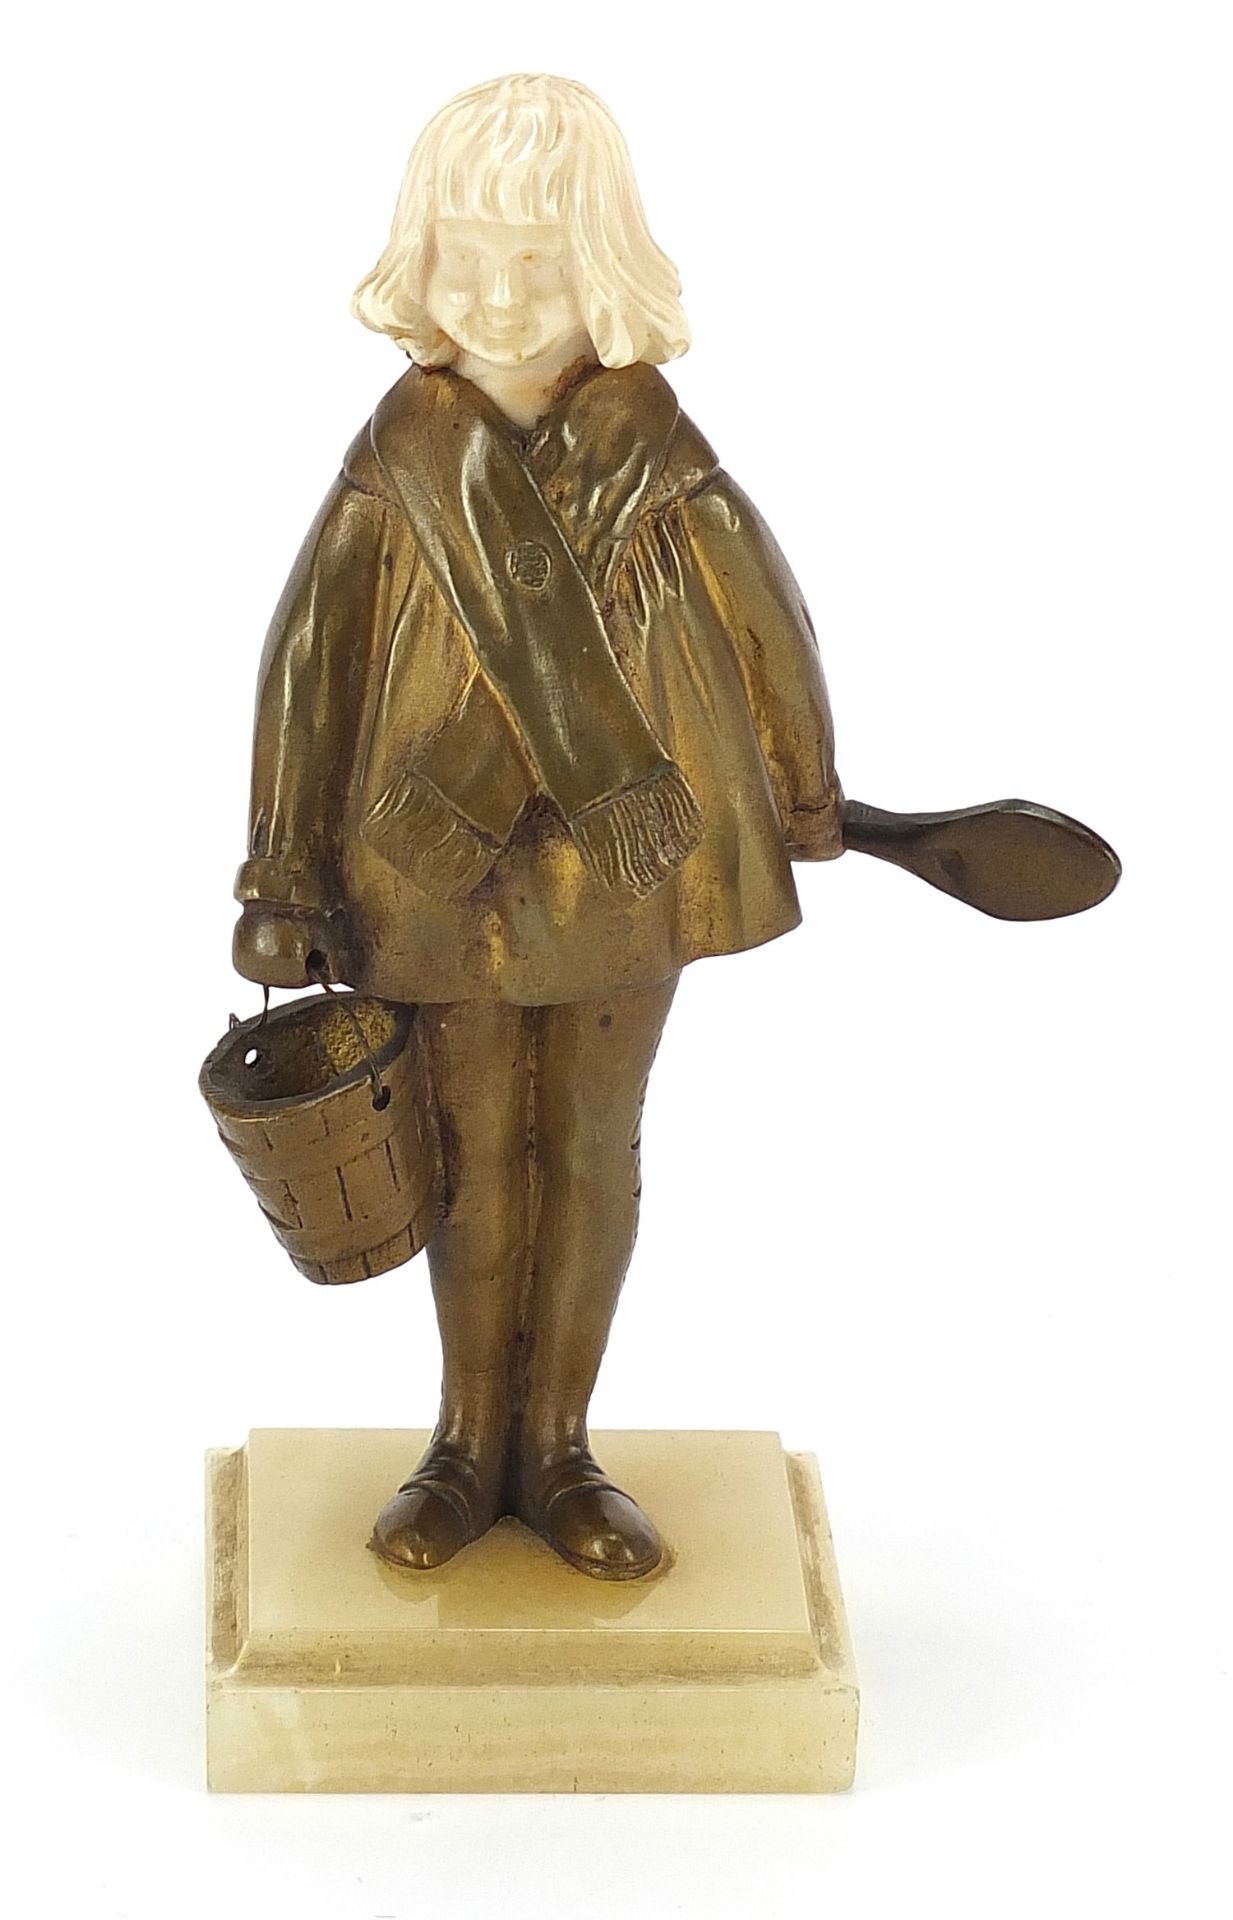 Art Deco gilt bronze and ivory figurine of a young girl holding a spoon and bucket, raised on a